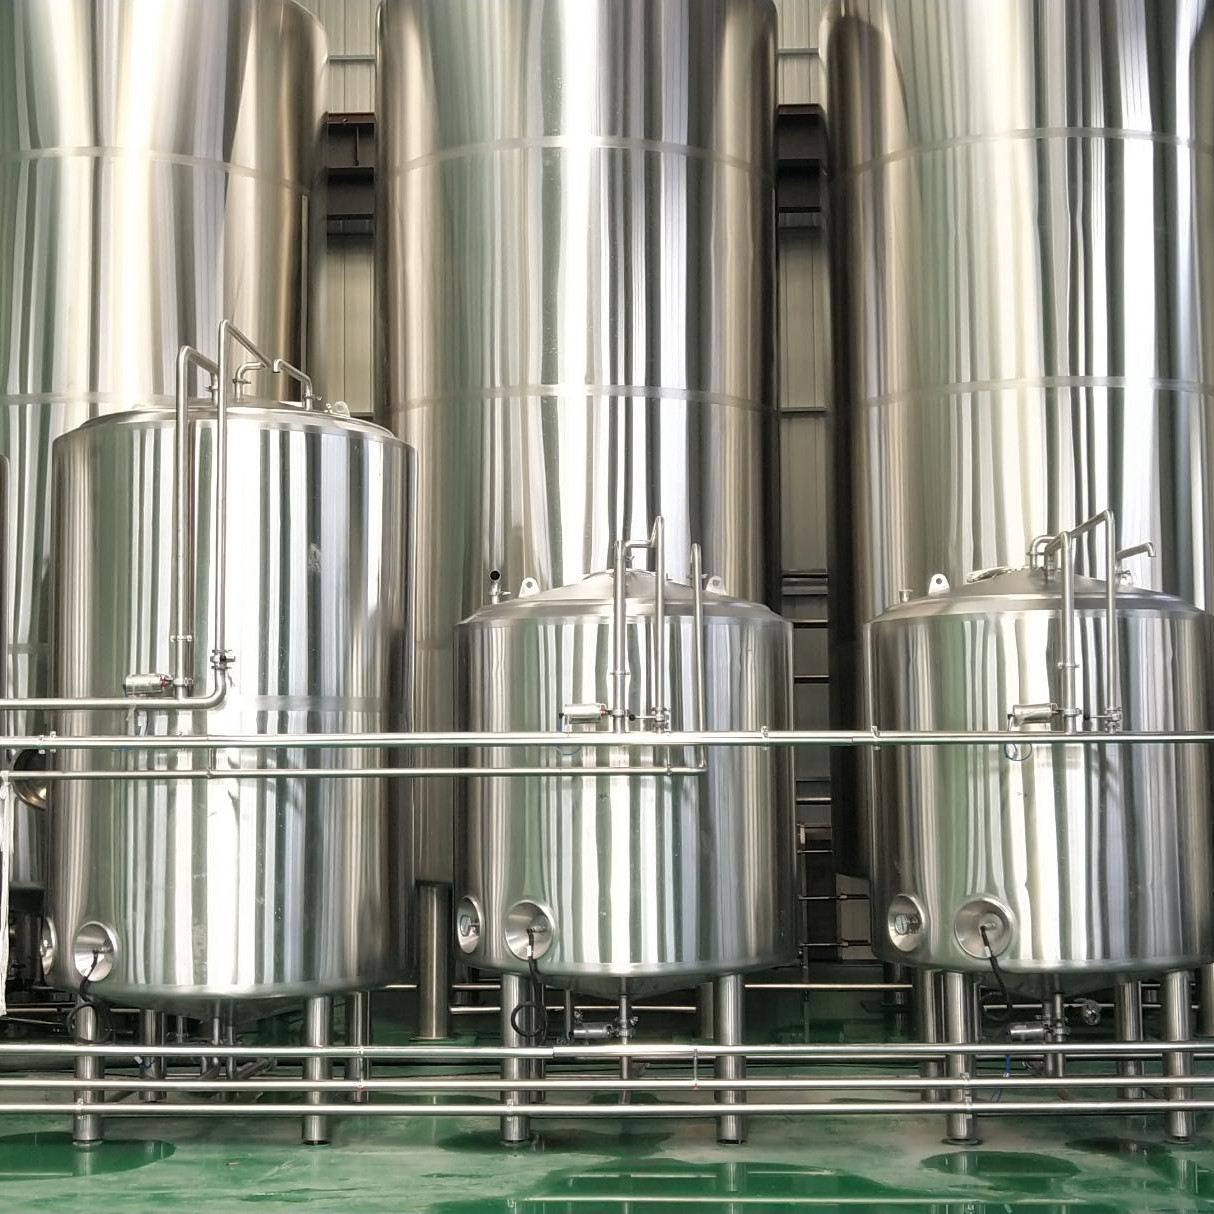 Large Scale CIP Cleaning System/ Cleaning-in-place equipment for beer brewing tanks